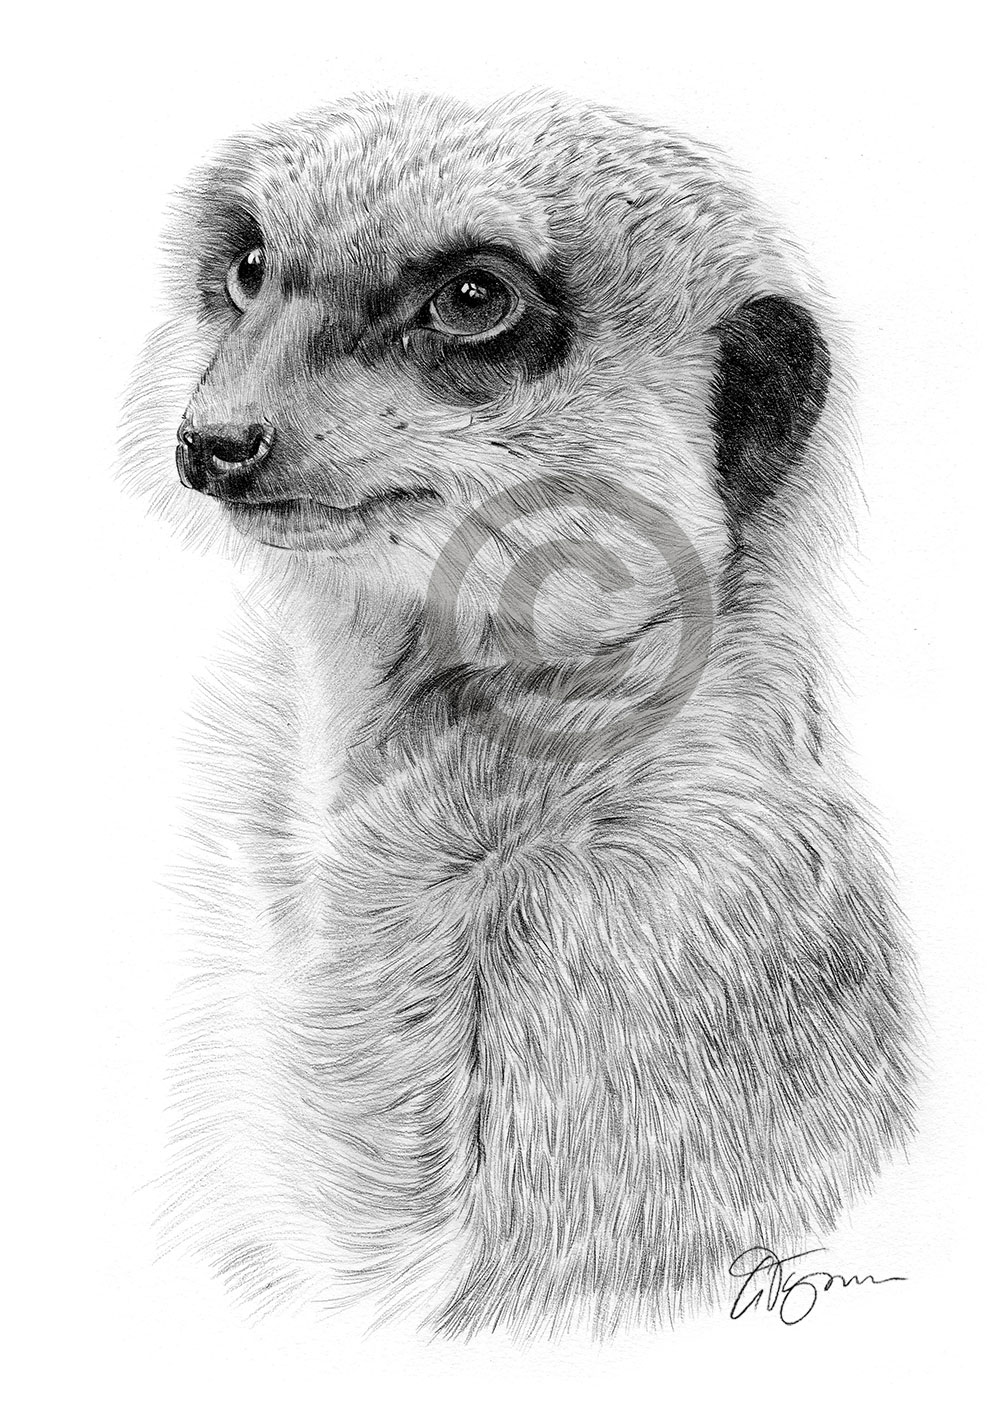 MEERKAT Pencil Drawing Print A3 / A4 sizes signed by artist Gary Tymon